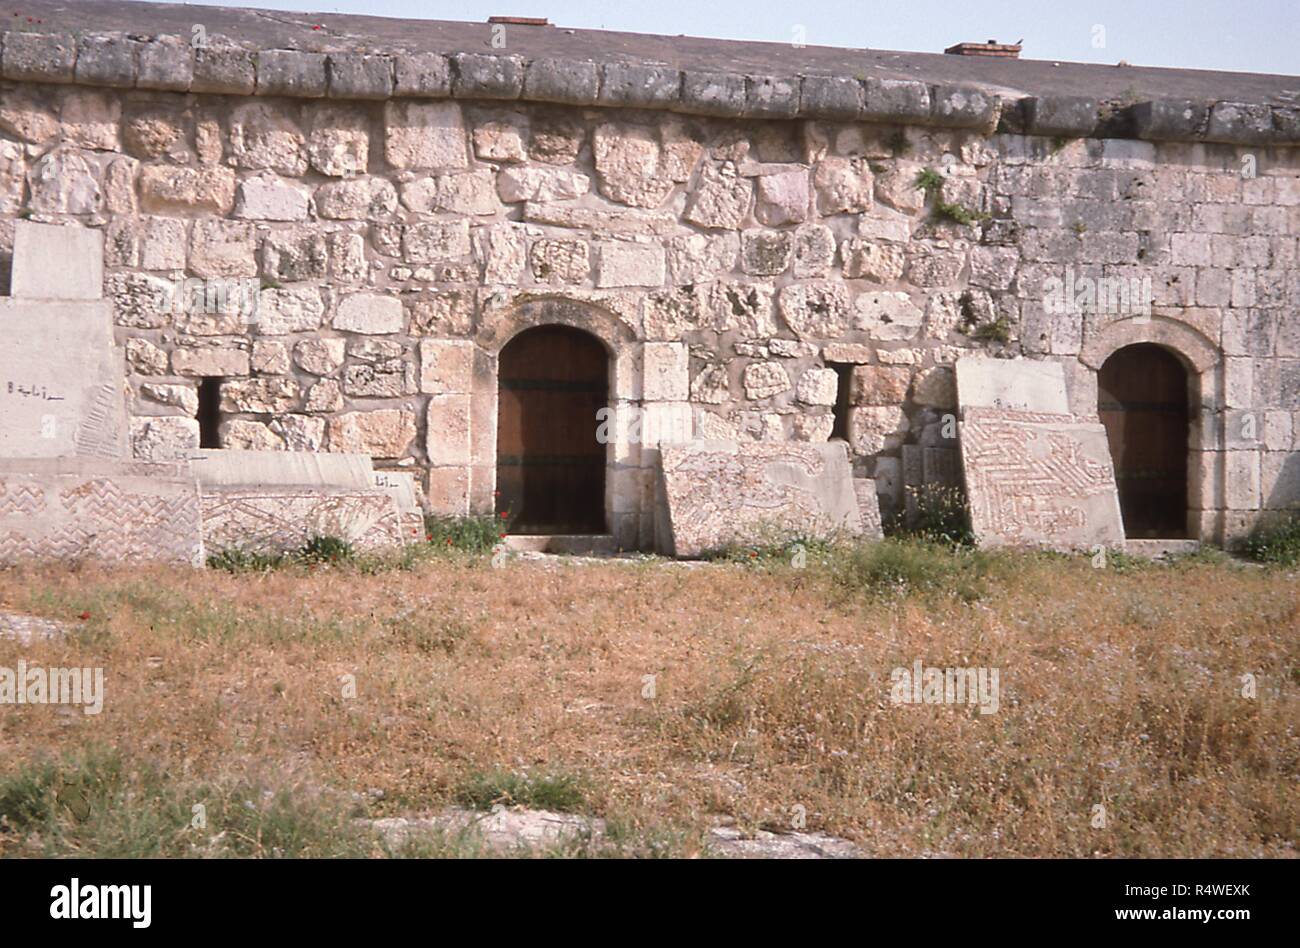 View of the Ottoman-era courtyard wall surrounding the Apamea archaeological museum in Qalaat Al-Madiq, Syria, June, 1994. Propped up beside the entrances are many large stone tablets decorated in mosaic tiles. () Stock Photo